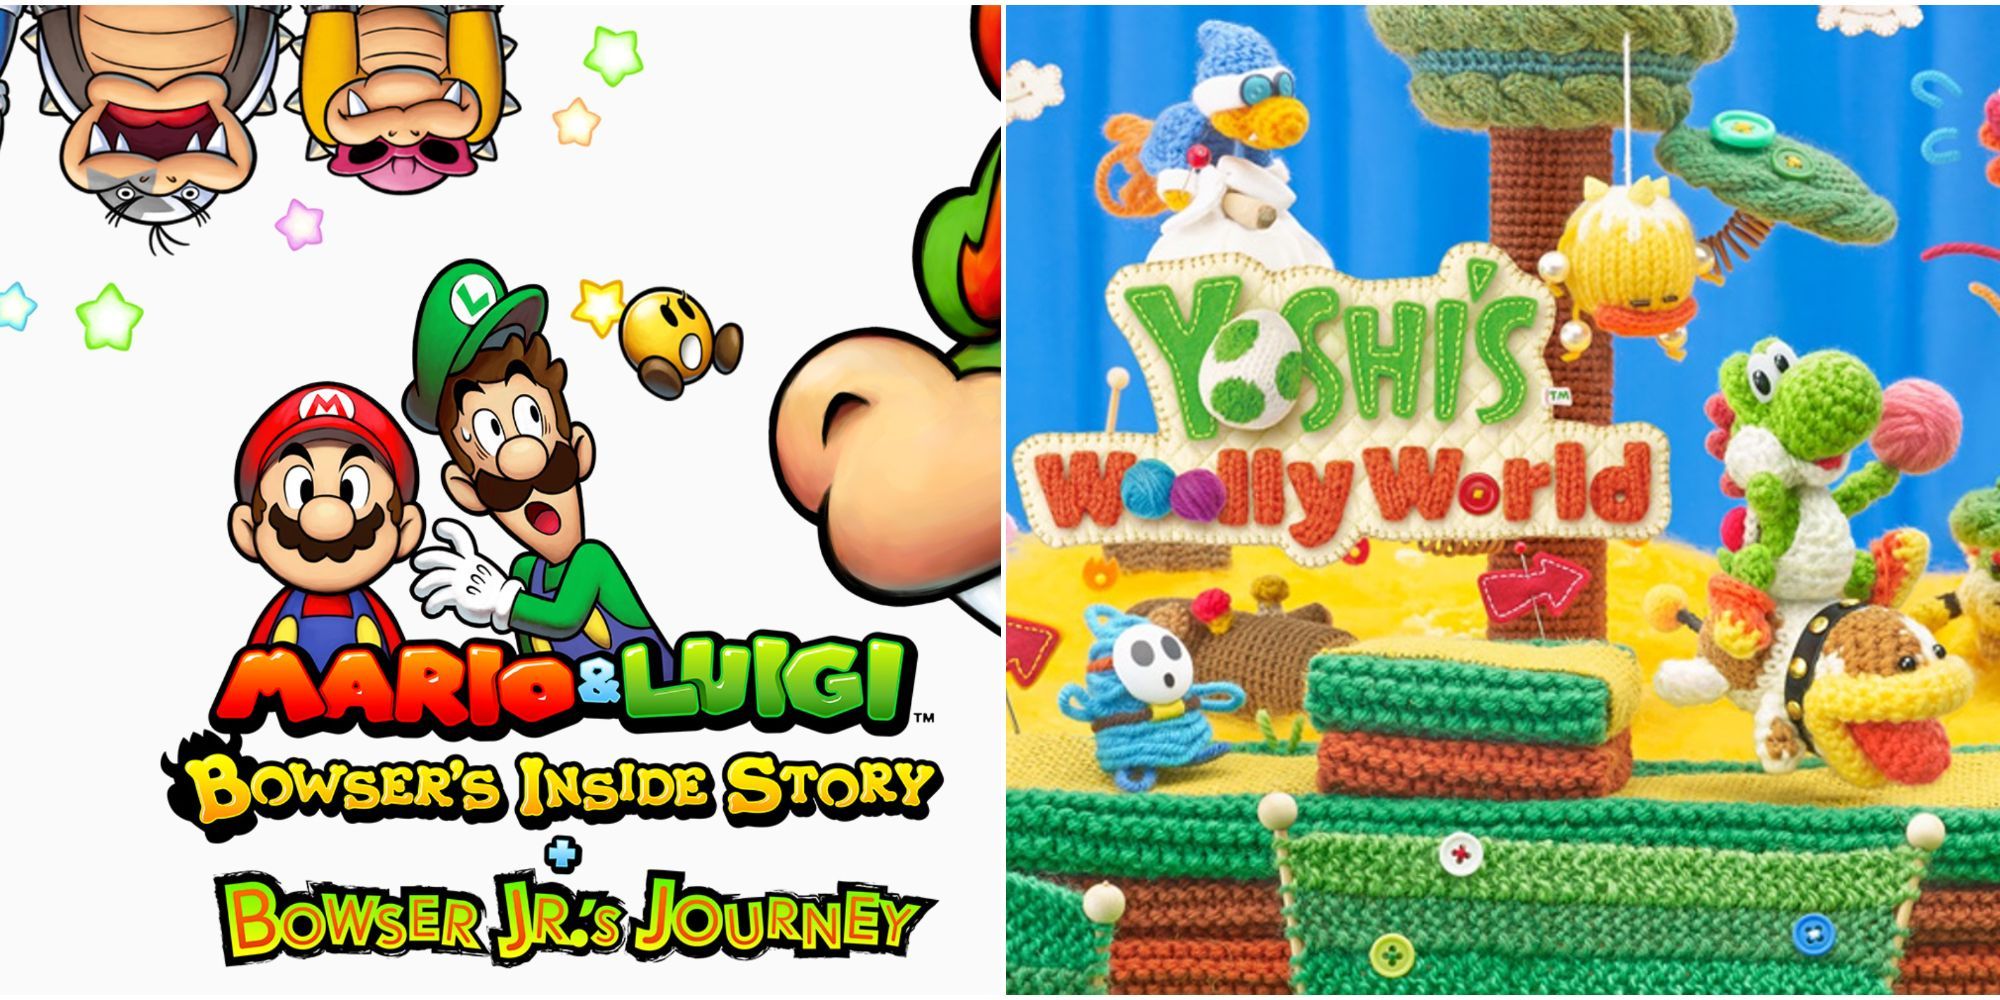 The cover poster for Mario & Luigi: Bowser's Inside Story with Luigi looking scared and Bowser creeping in from off screen, beside the cover for Yoshi's Woolly World where Yoshi is made of yarn and holding a ball of yarn